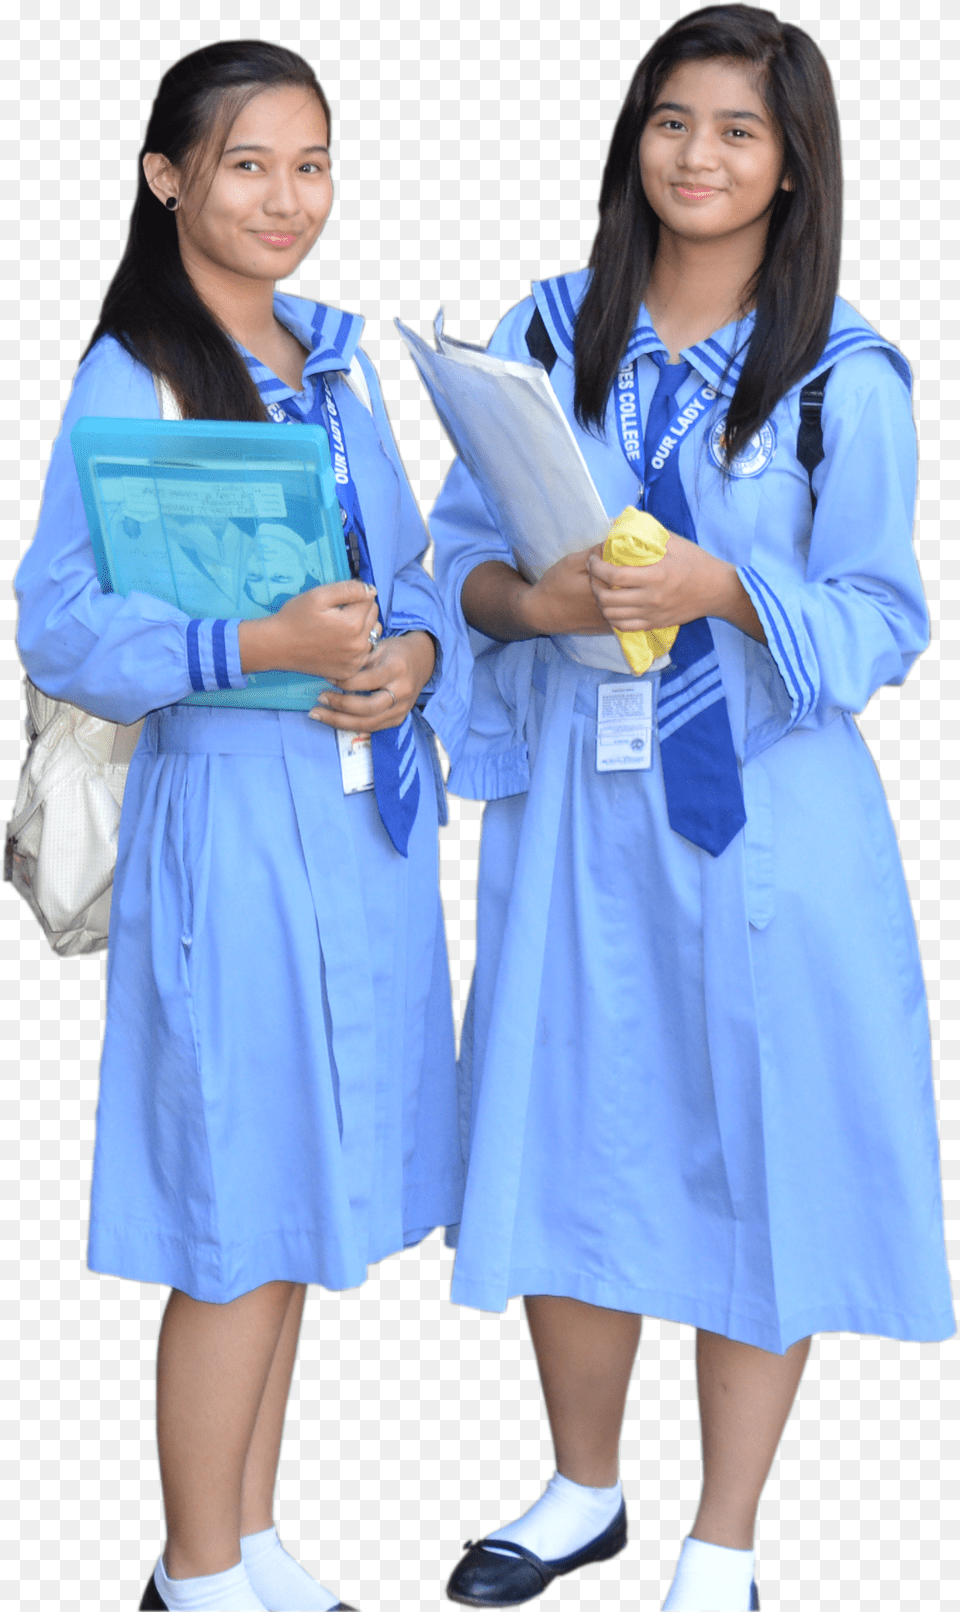 Our Lady Of Lourdes College Uniform, Graduation, Person, Girl, People Png